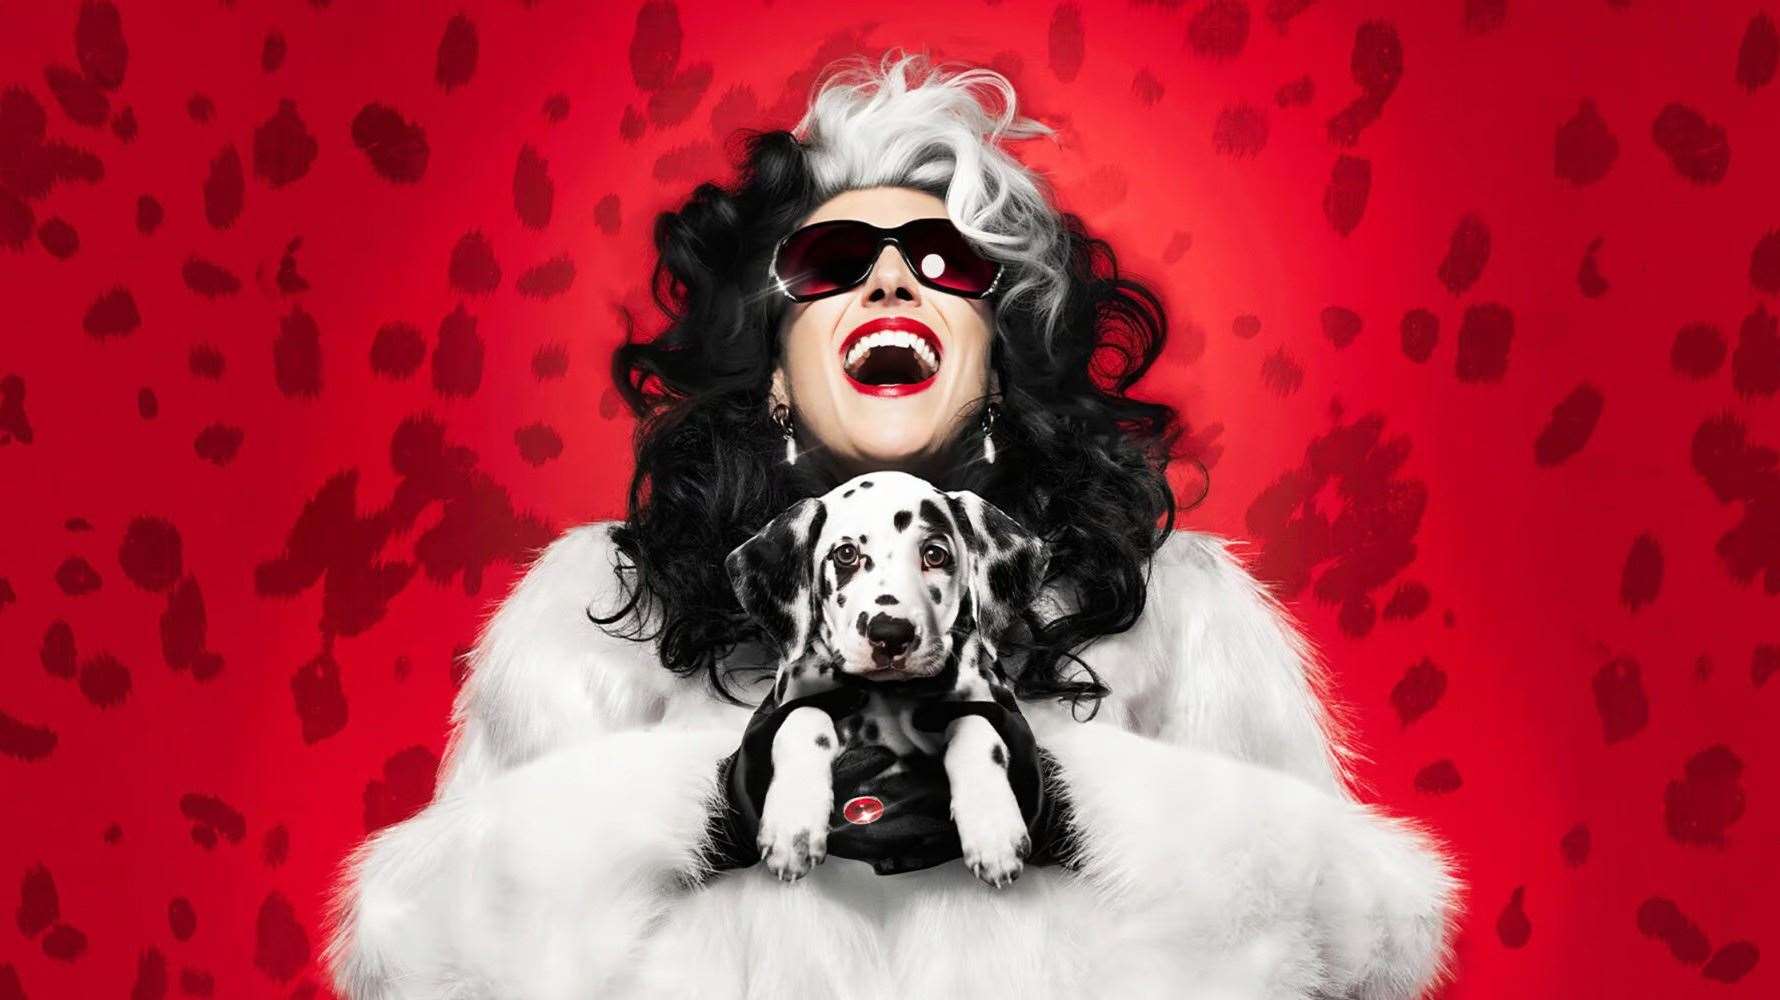 101 Dalmatians follows Pongo and Perdi, two dogs who must save their puppies from the evil fashionista Cruella de Vil. Picture: Marlowe Theatre